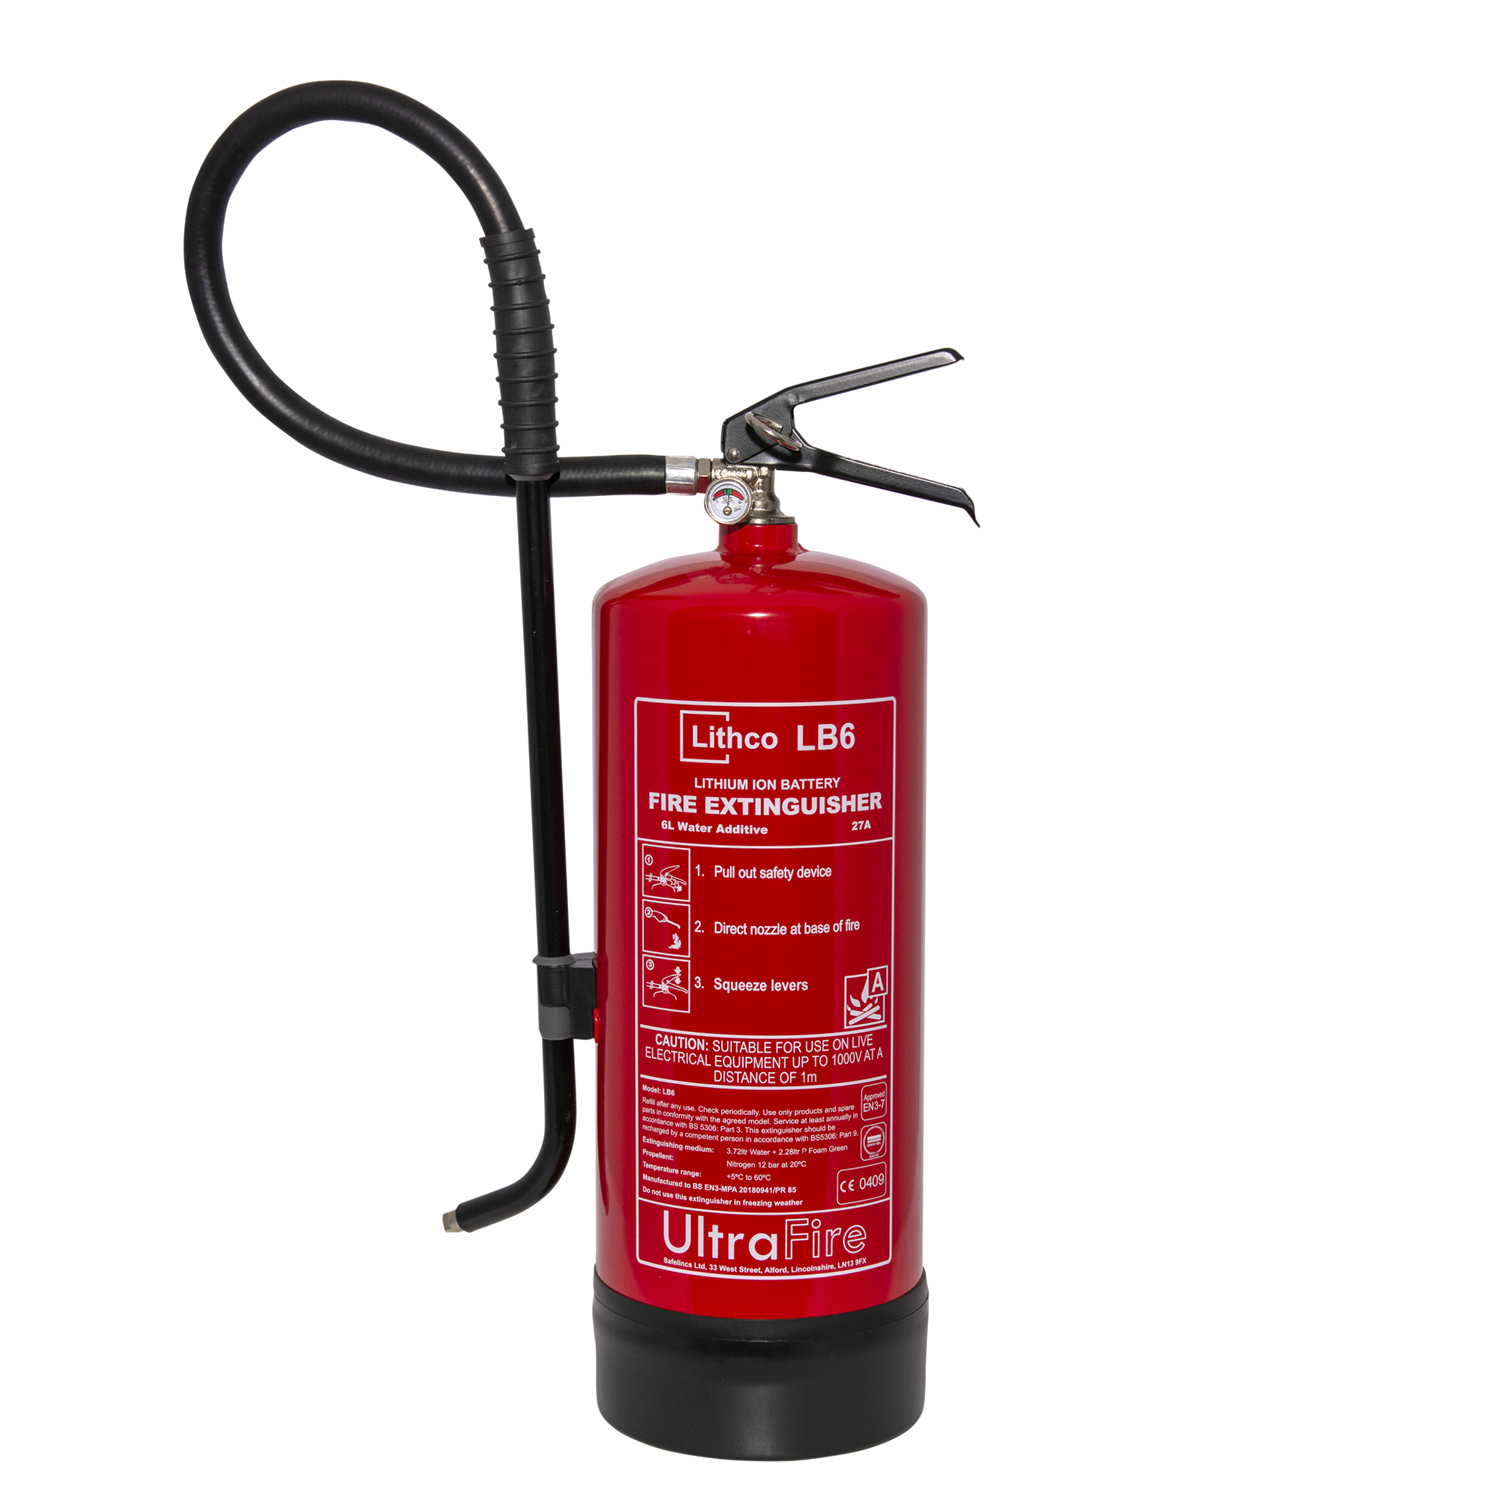 The new Lithco LB6 Lithium-Ion Battery Fire Extinguisher from UltraFire